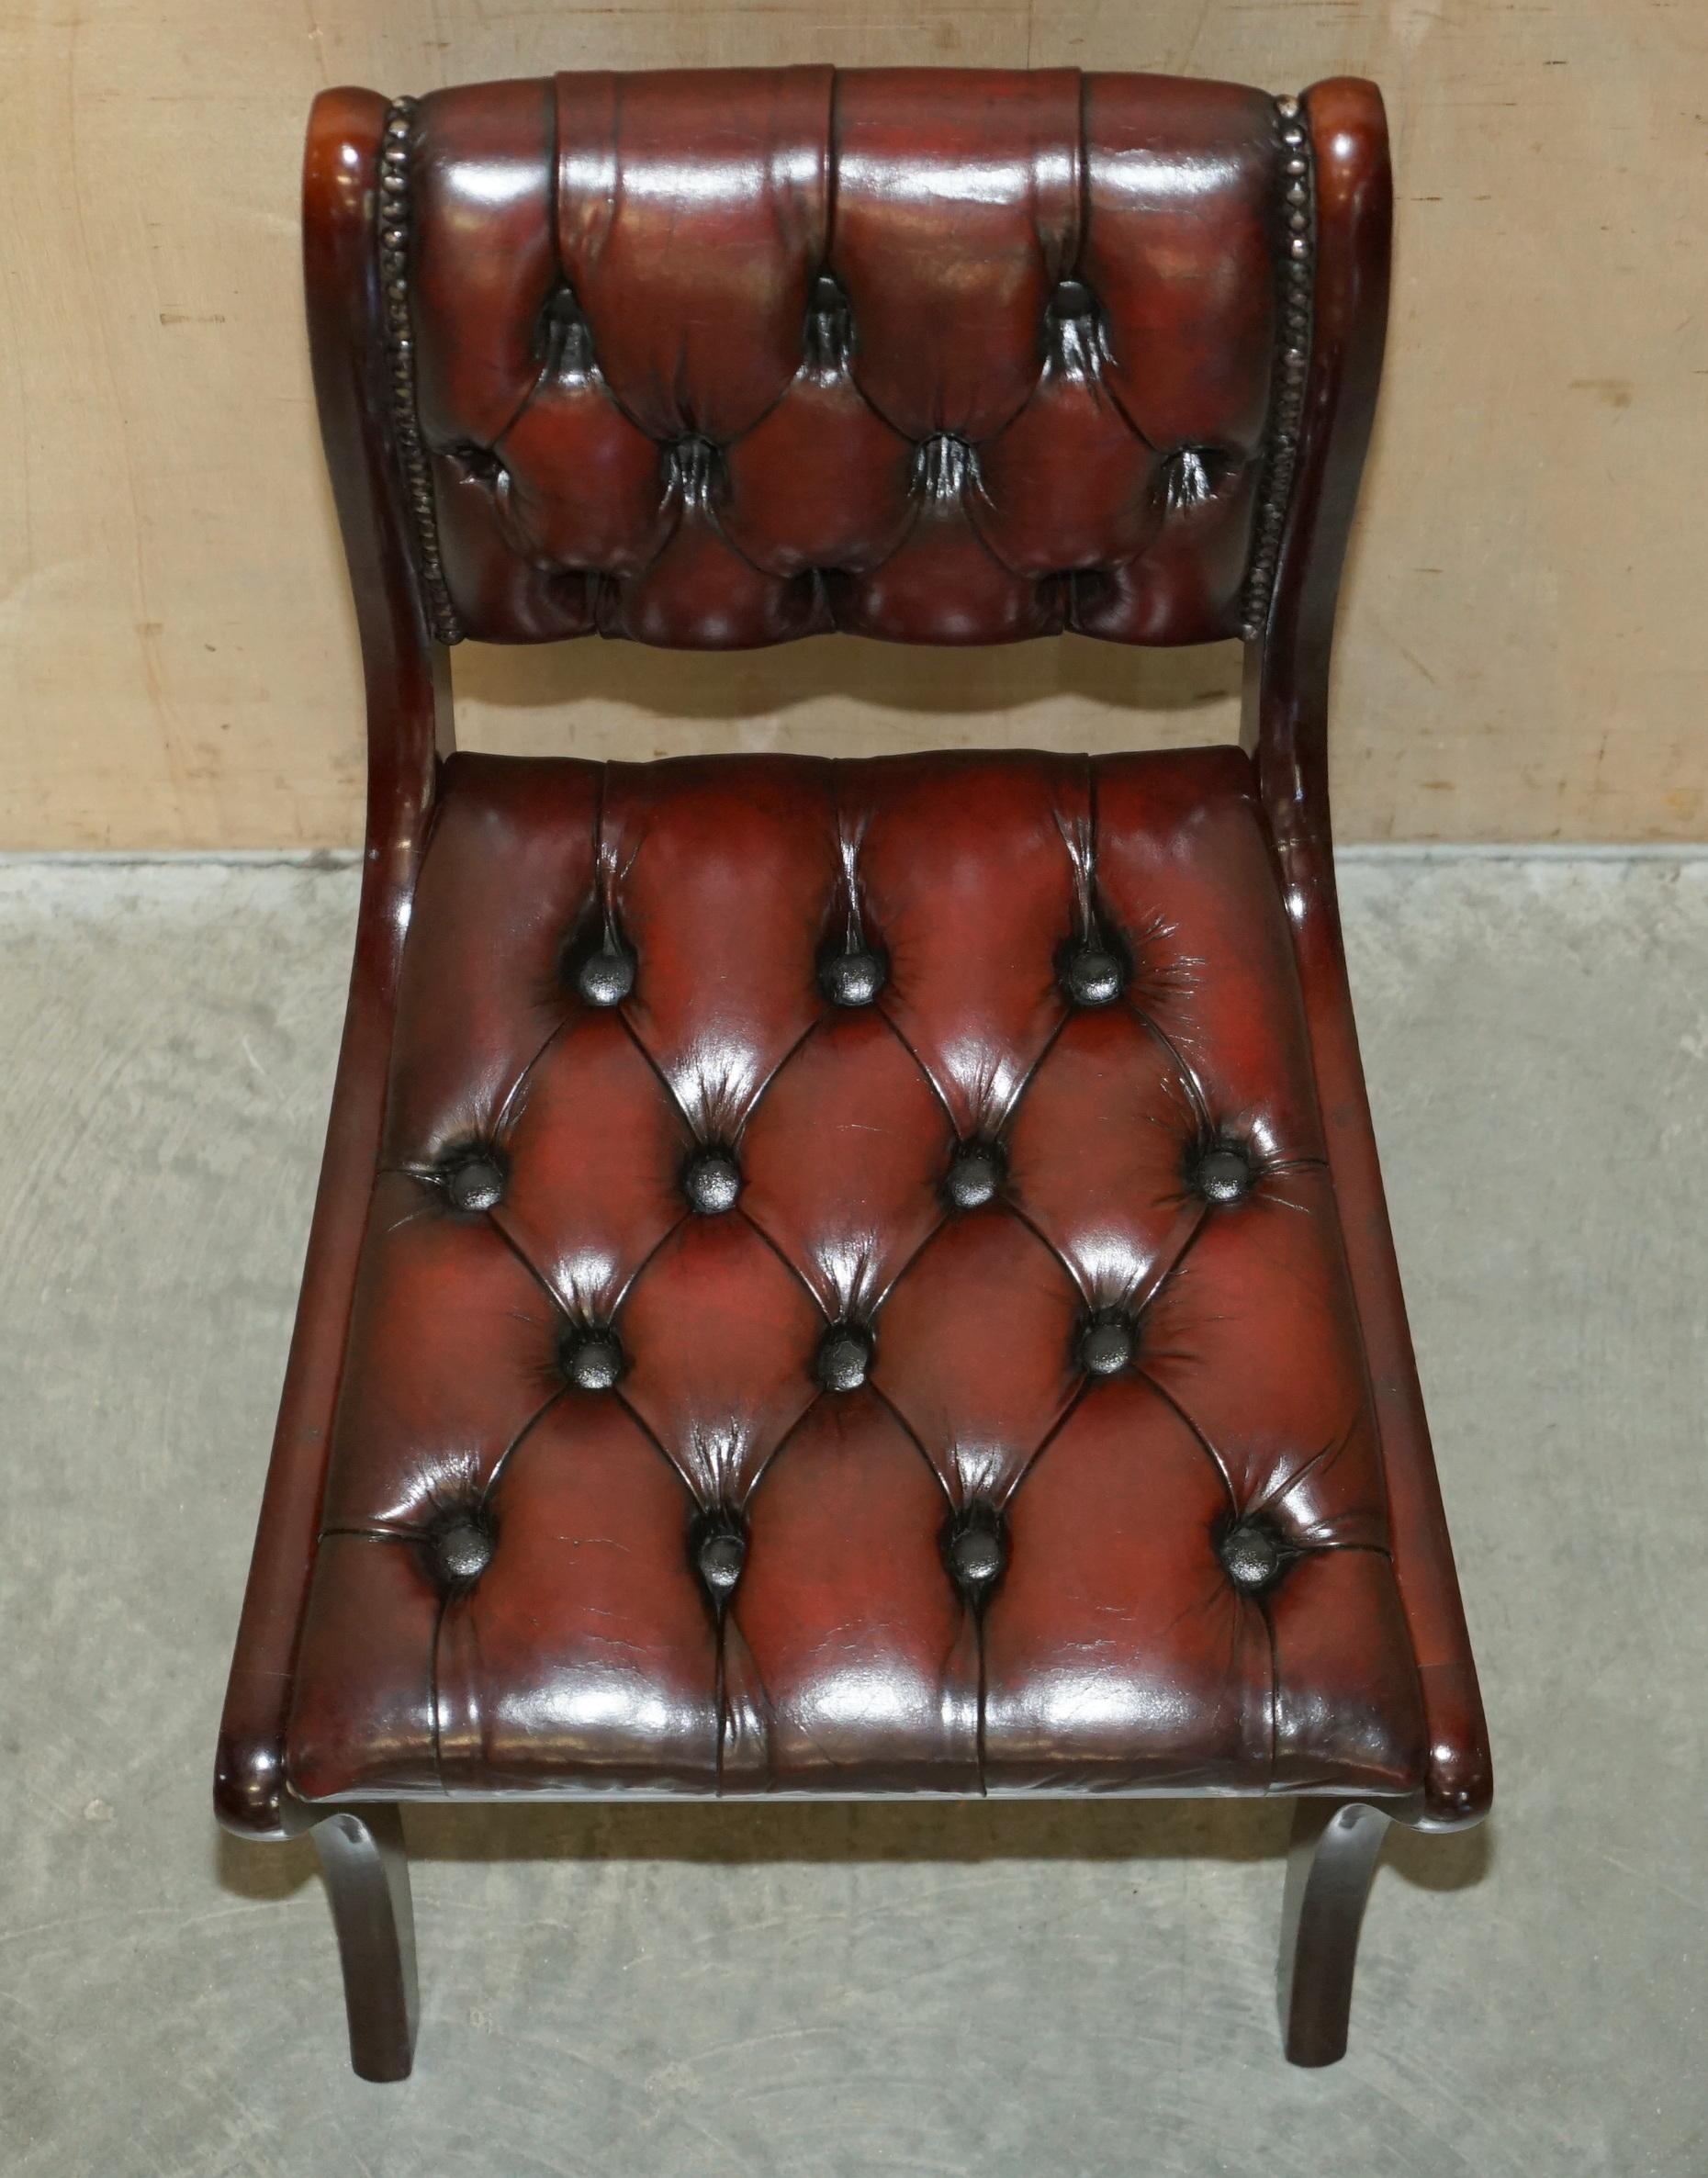 SIX VINTAGE HARDWOOD FULLY RESTORED CHESTERFIELD OXBOOD LEATHER DiNING CHAIRS 6 For Sale 7